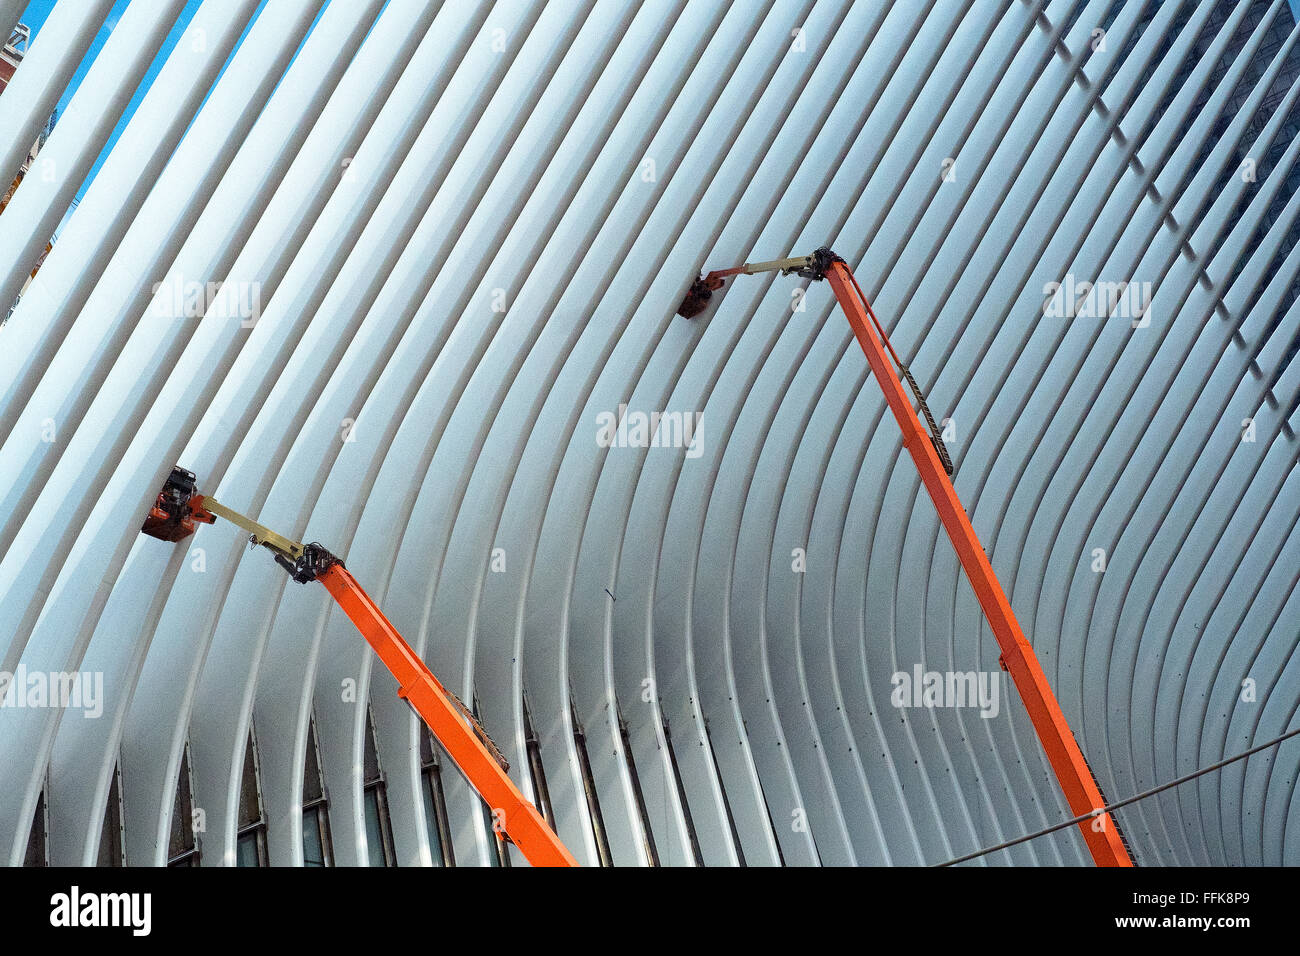 Workmen on cherry pickers paint the beams that make up the roof of the World Trade Centre Transportation Hub. Stock Photo